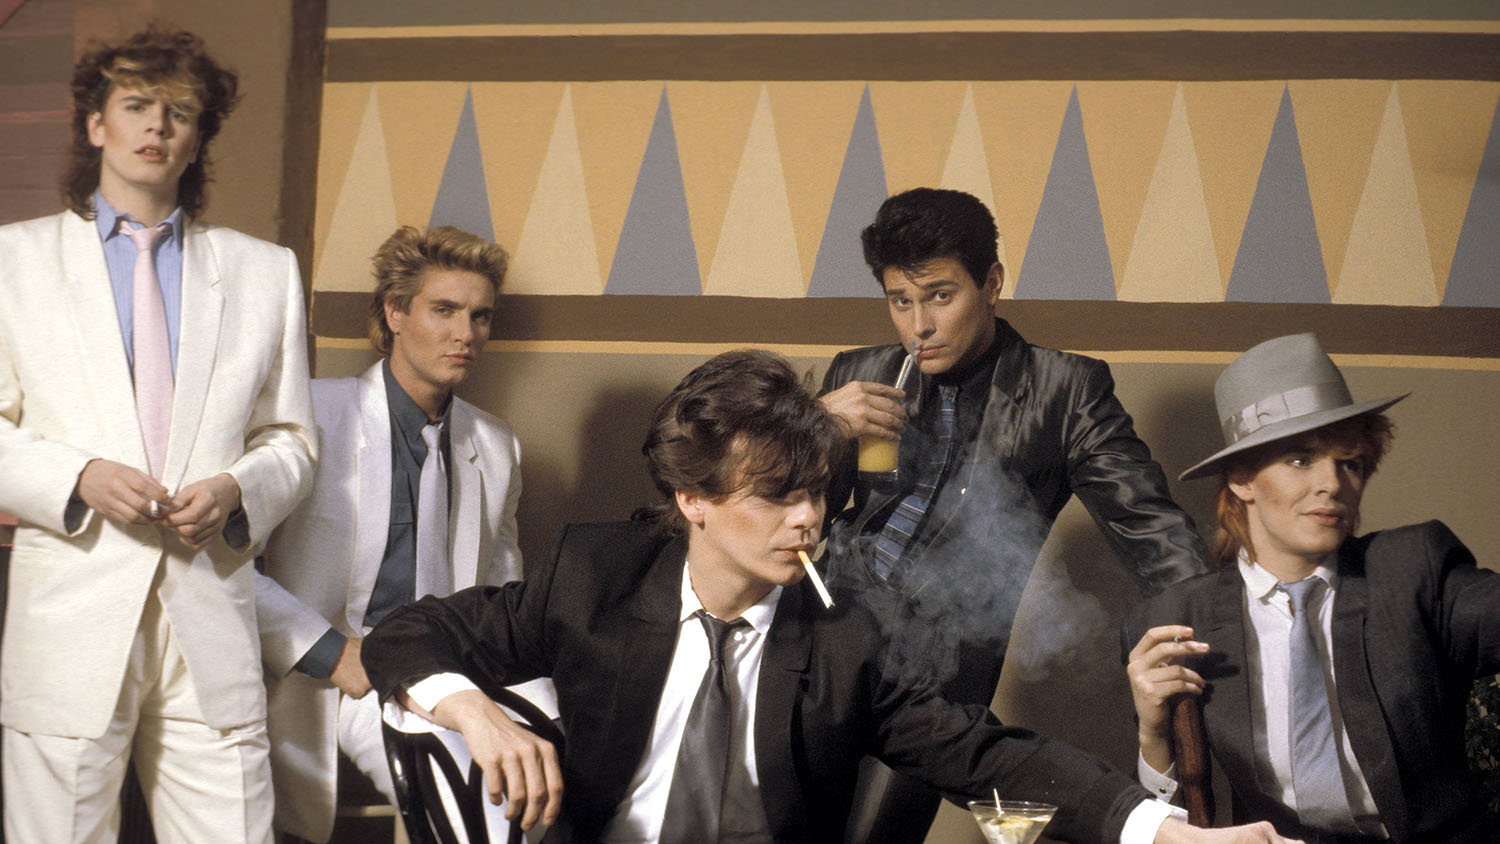 Duran Duran: Facts about the 80s band and their rise to fame